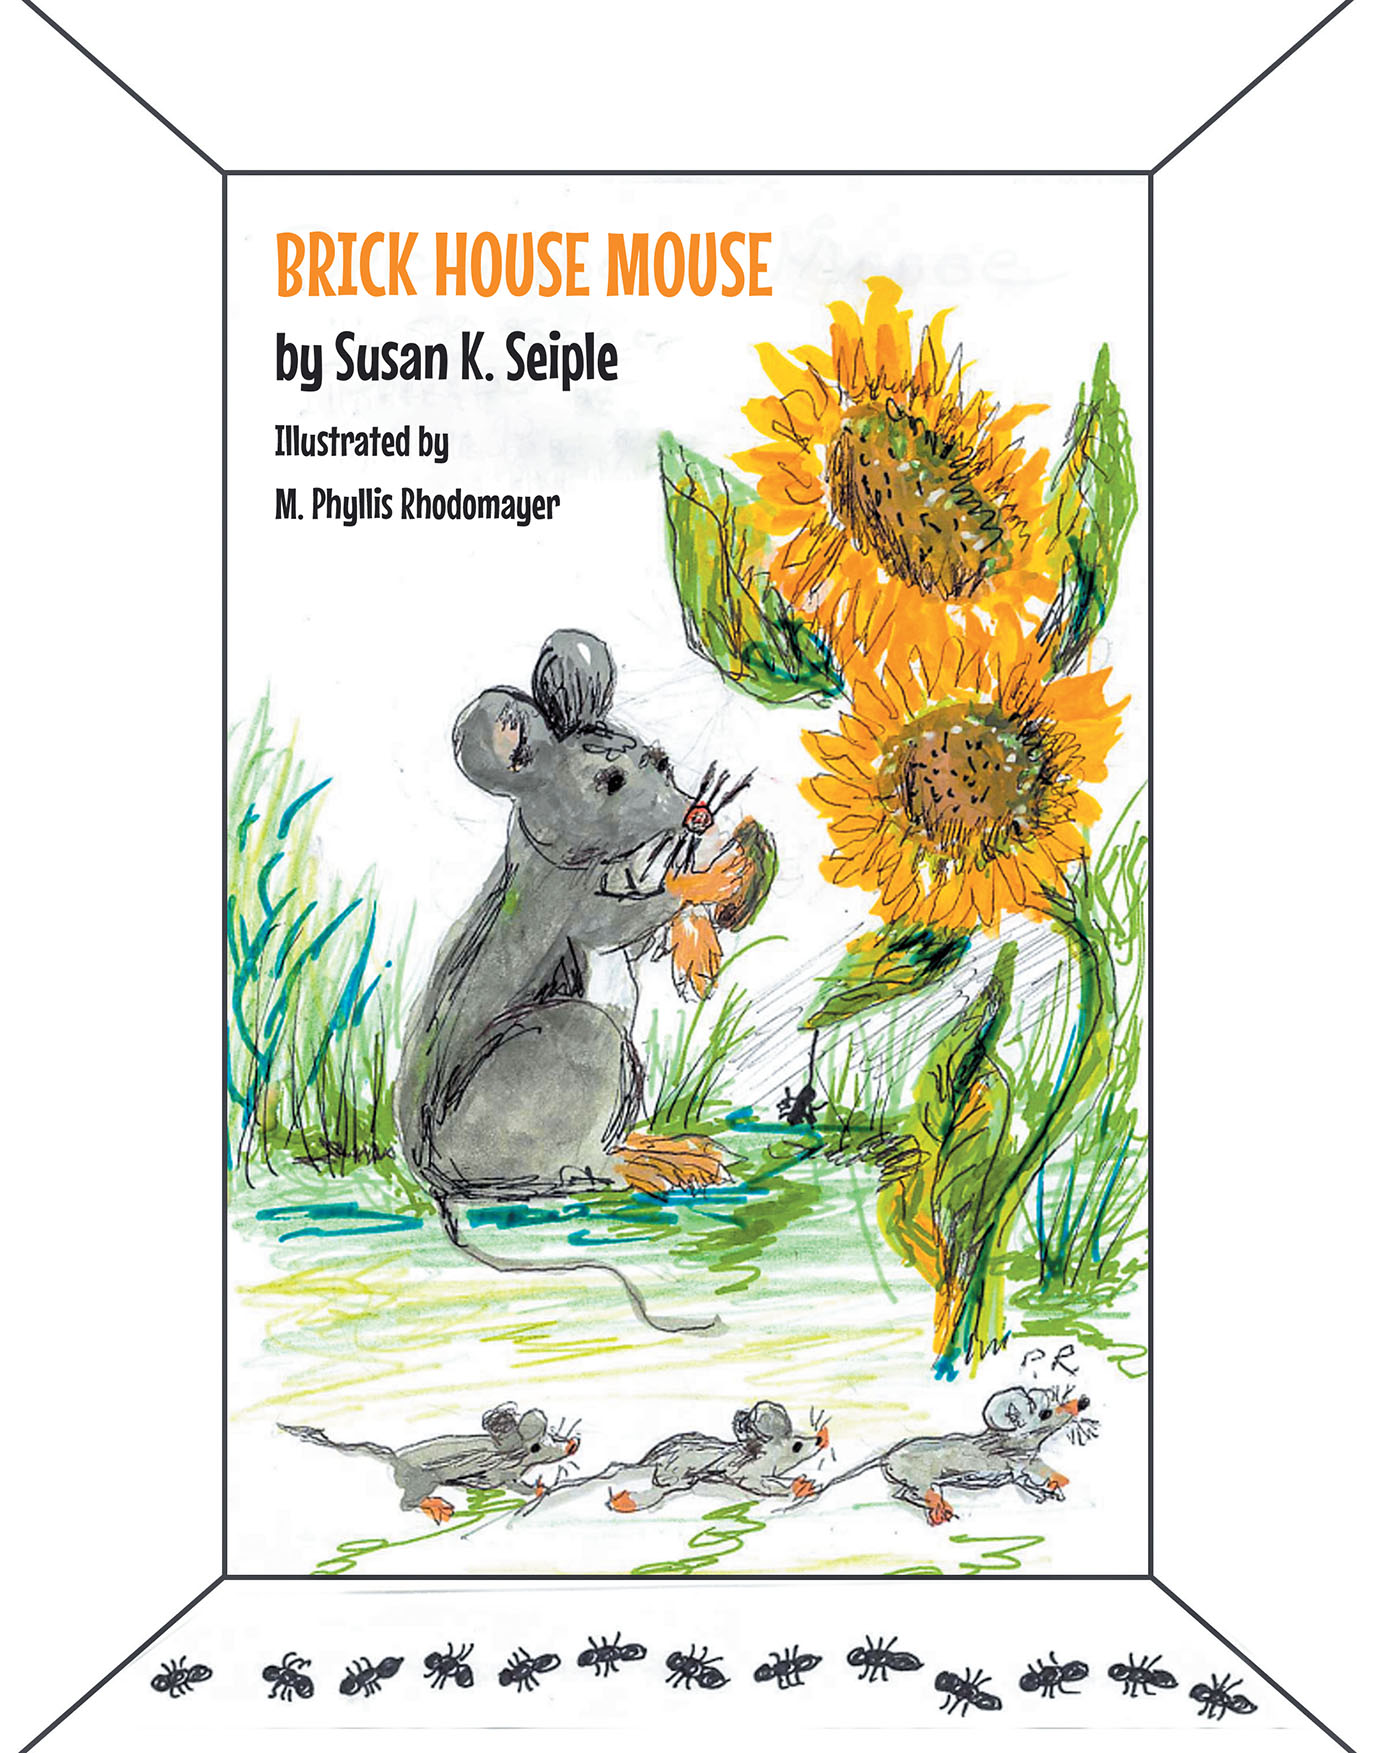 Author Susan Seiple’s New Book, "Brick-House Mouse," is a Sweet and Silly Story About a Little Mouse Who Decides to Pay a Visit to an Unsuspecting Family